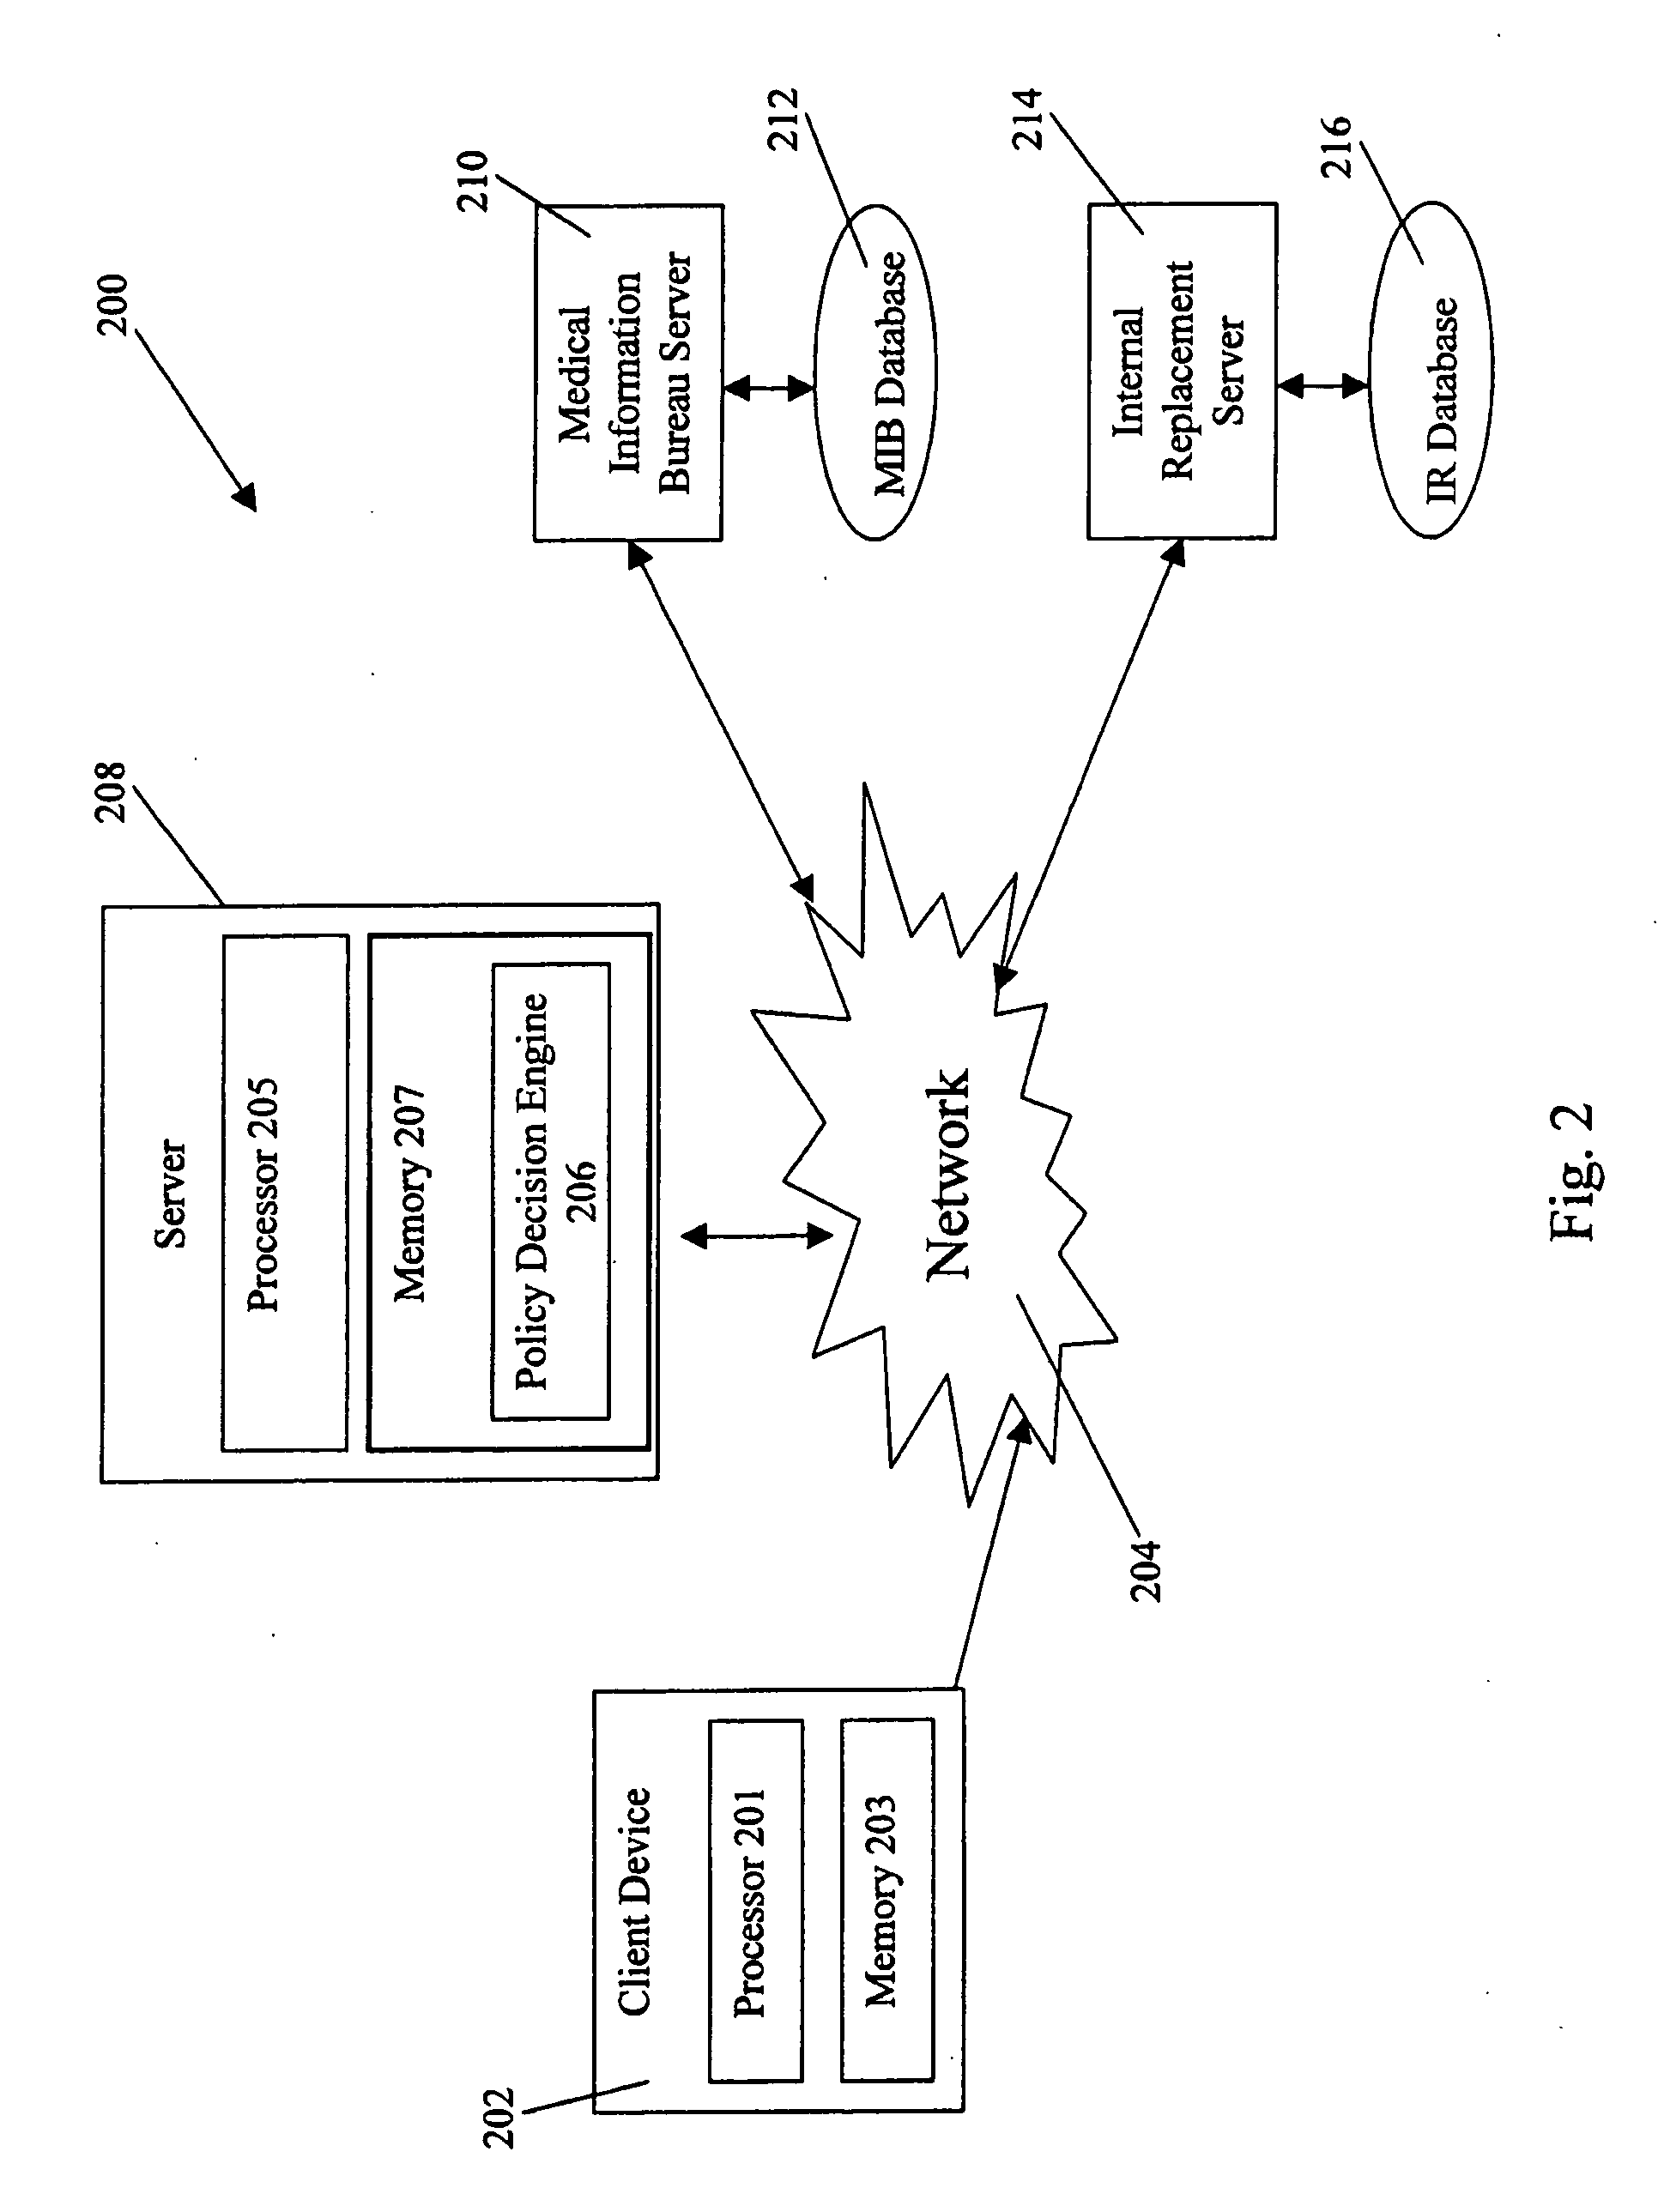 Systems and methods for providing health insurance coverage